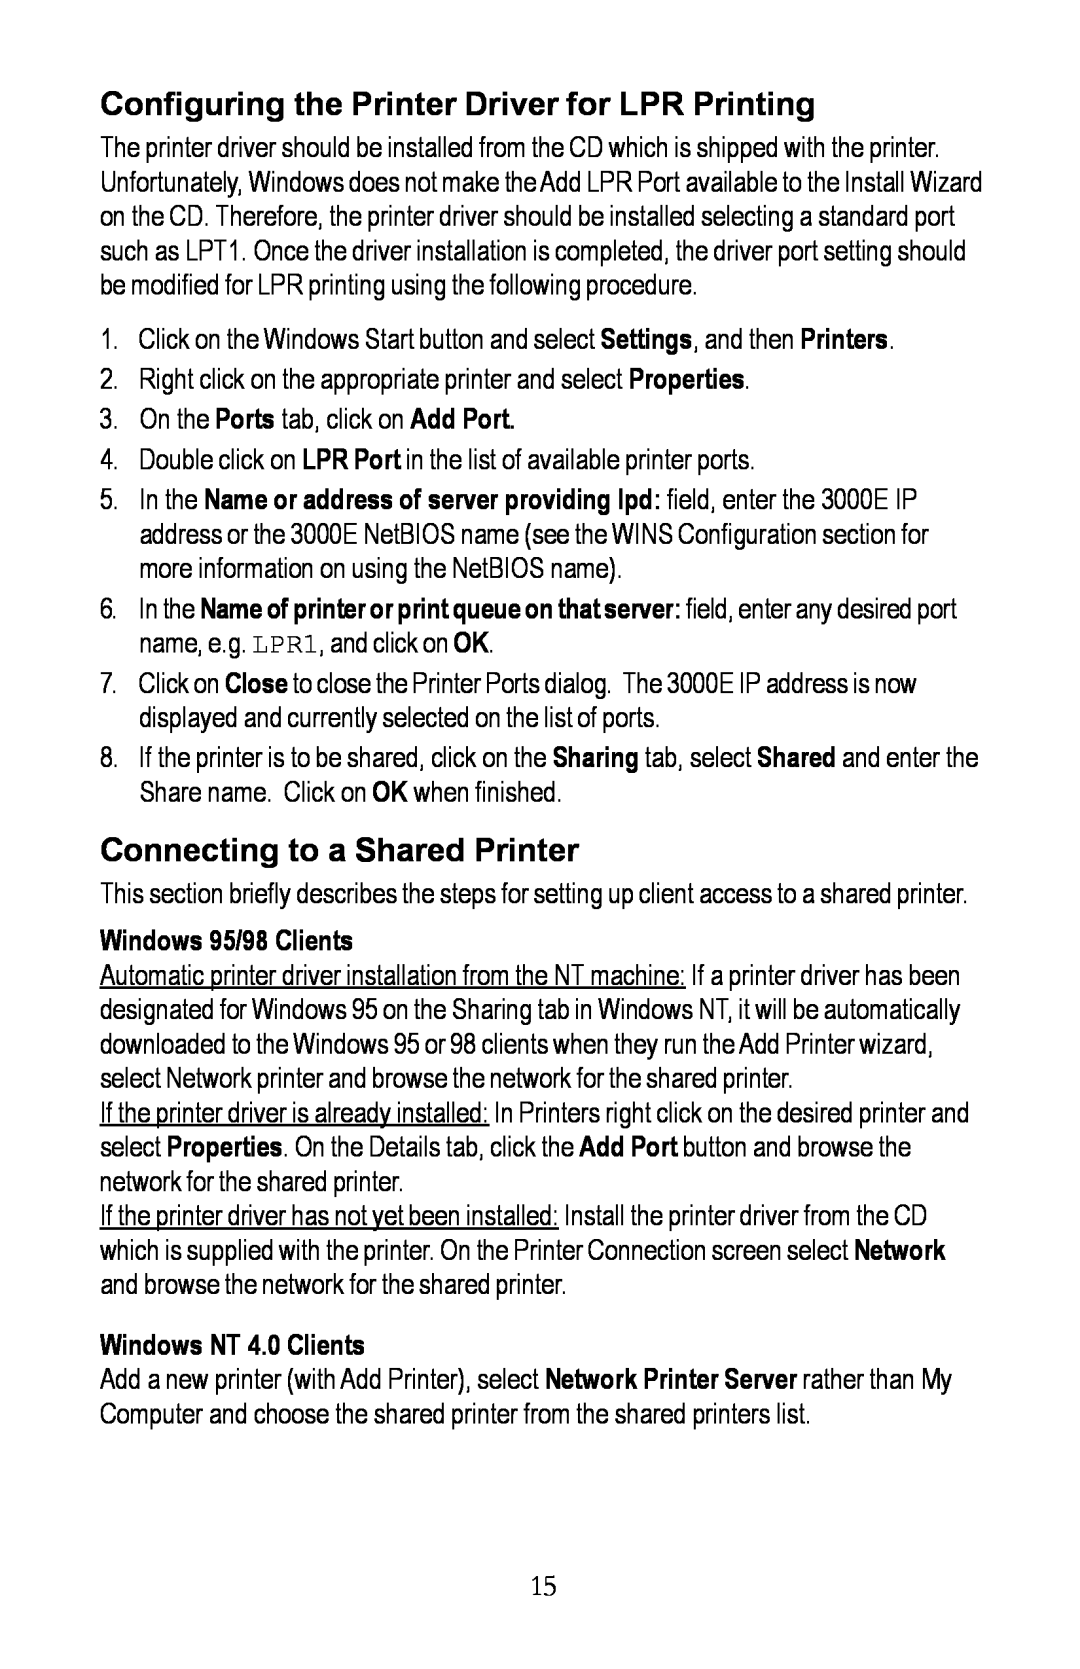 Kyocera EcoLAN 3000E manual Configuring the Printer Driver for LPR Printing, Connecting to a Shared Printer 